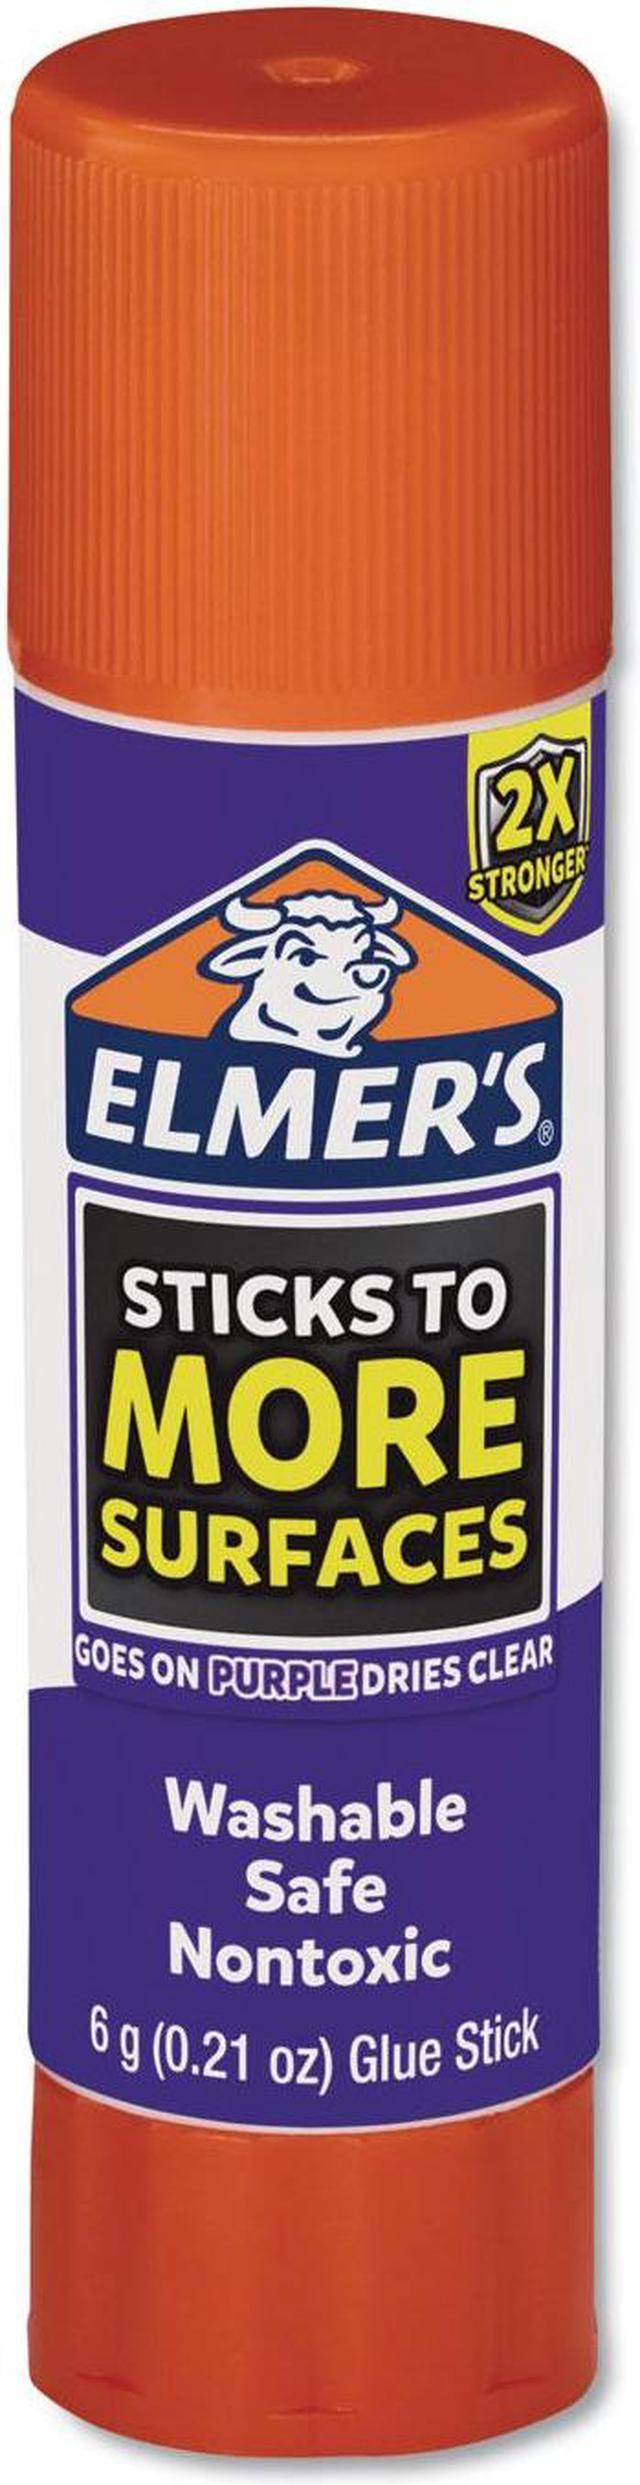 Elmer's RE-STICK Washable clear non toxic School Glue Sticks -2 packs of 12